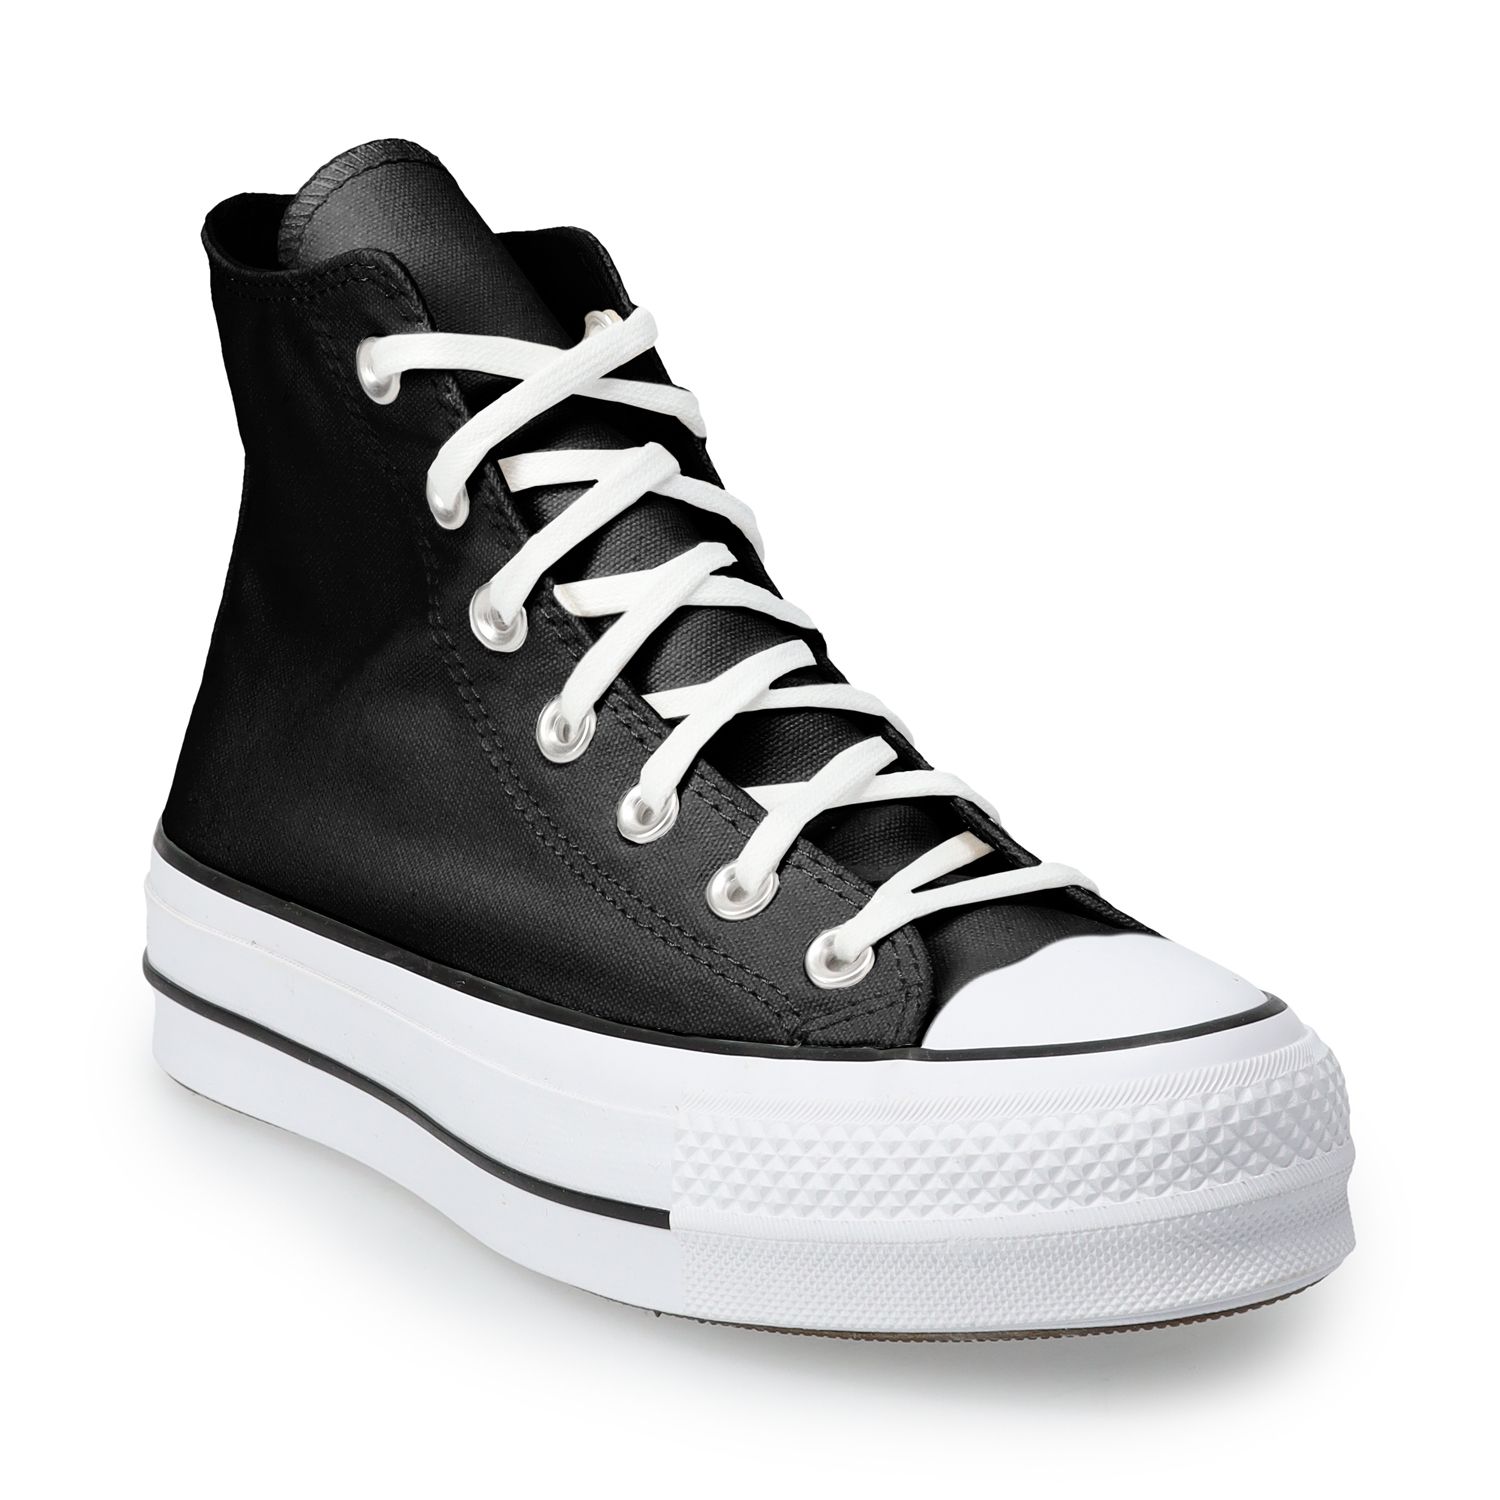 high or low top chucks for lifting